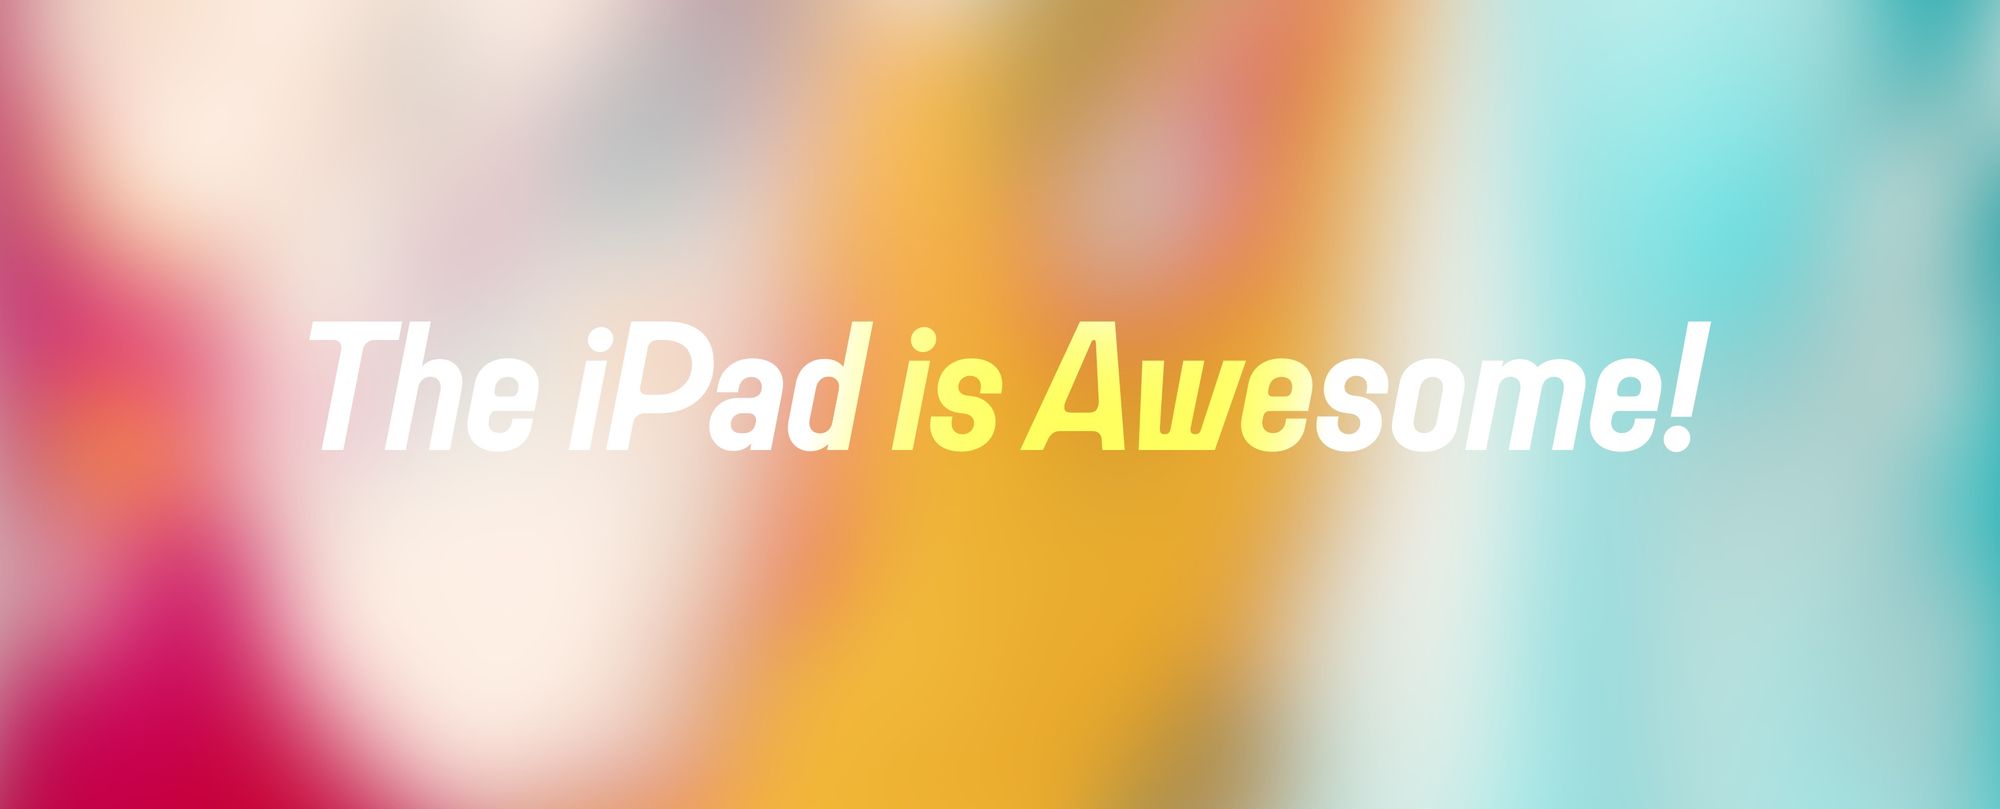 The iPad is Awesome, Actually